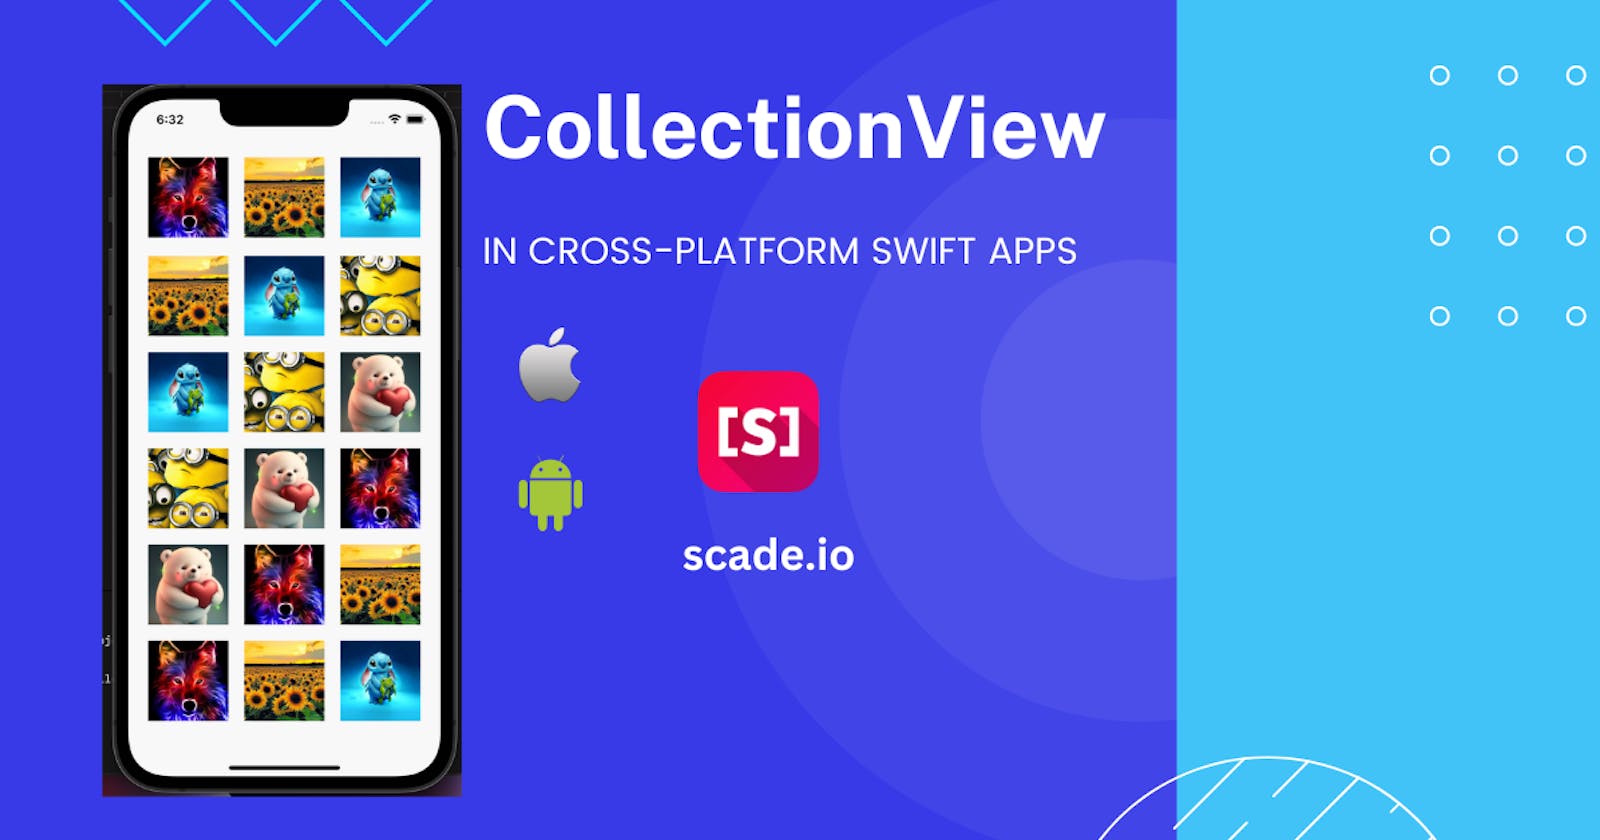 Collection View in Cross-Platform Swift Apps